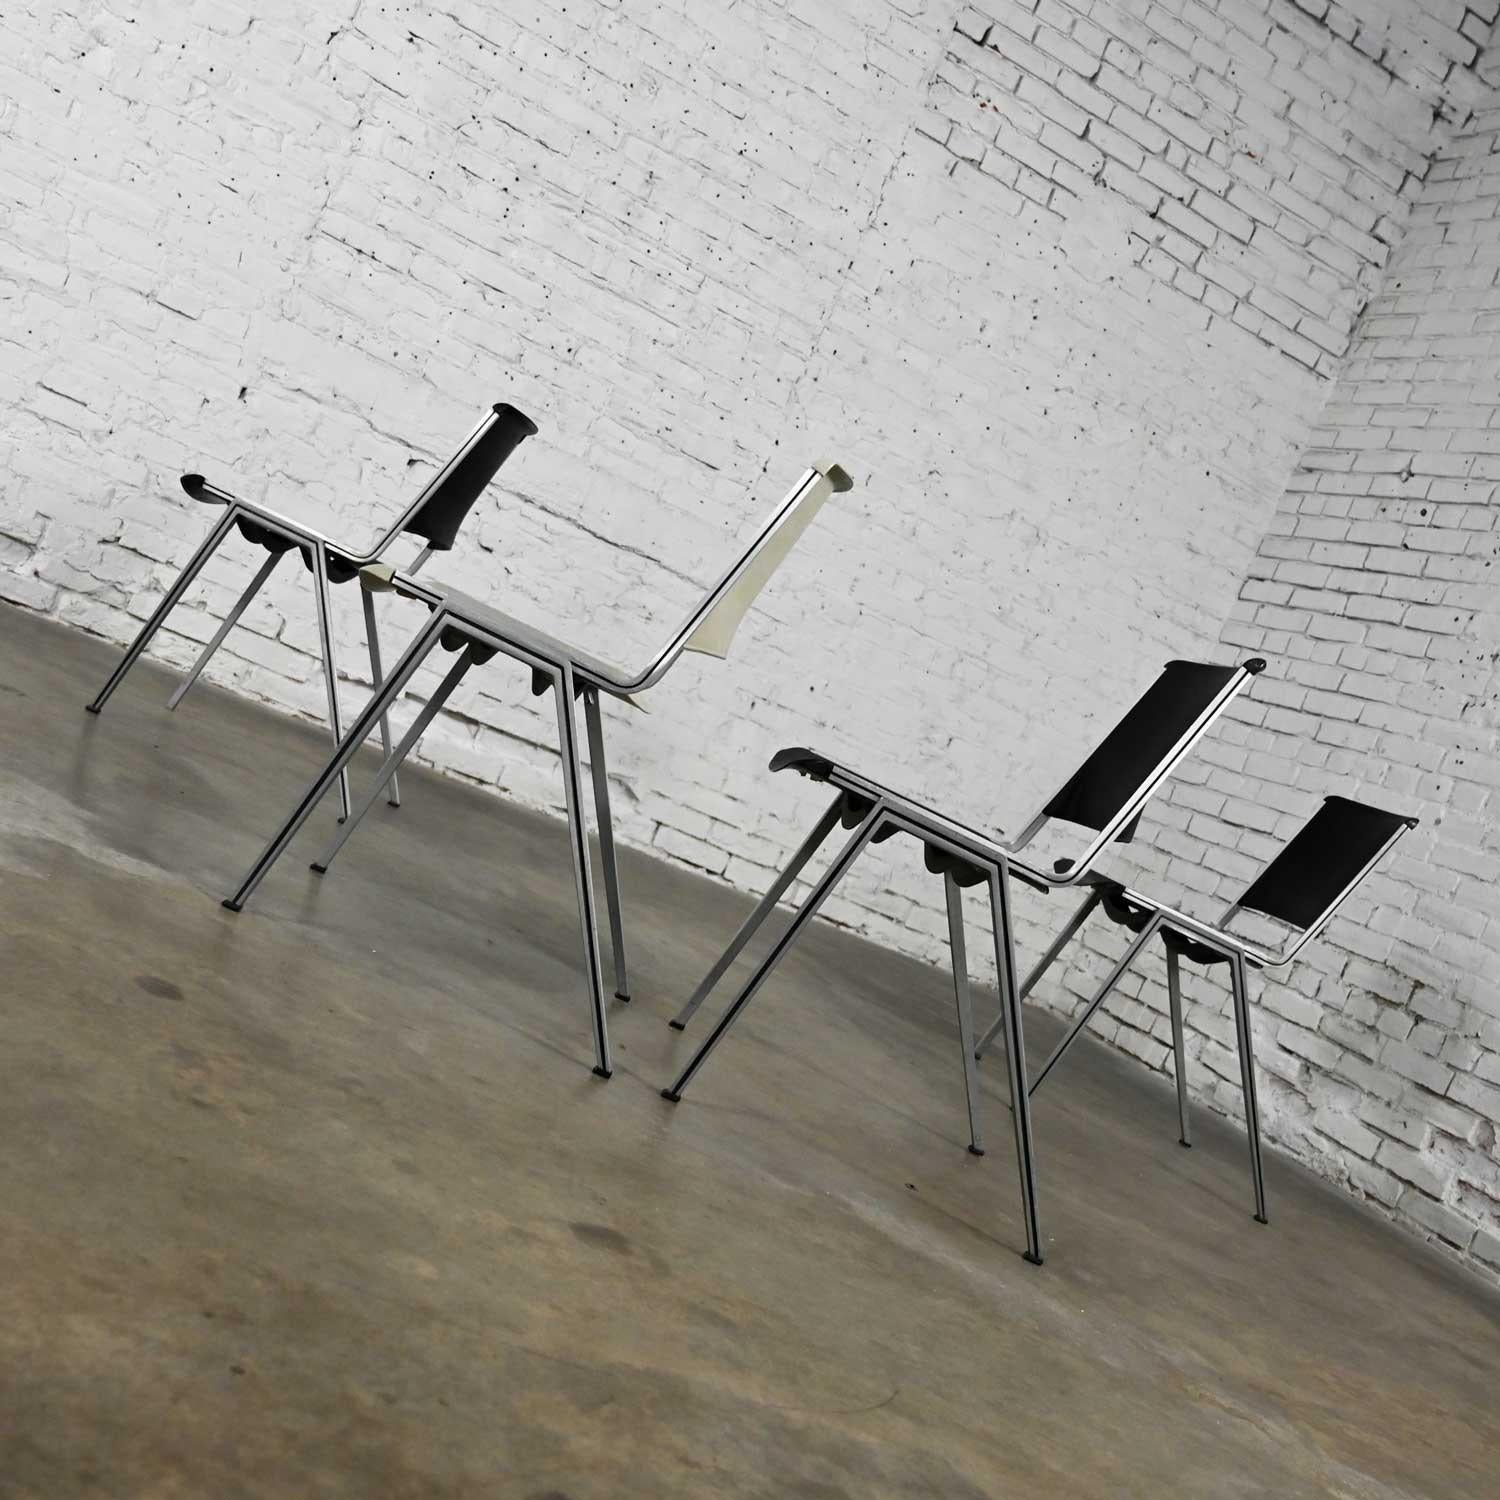 Vintage Aluminum Steelcase Stacking Chairs Model #1278 1 White 3 Black Set of 4 In Good Condition For Sale In Topeka, KS